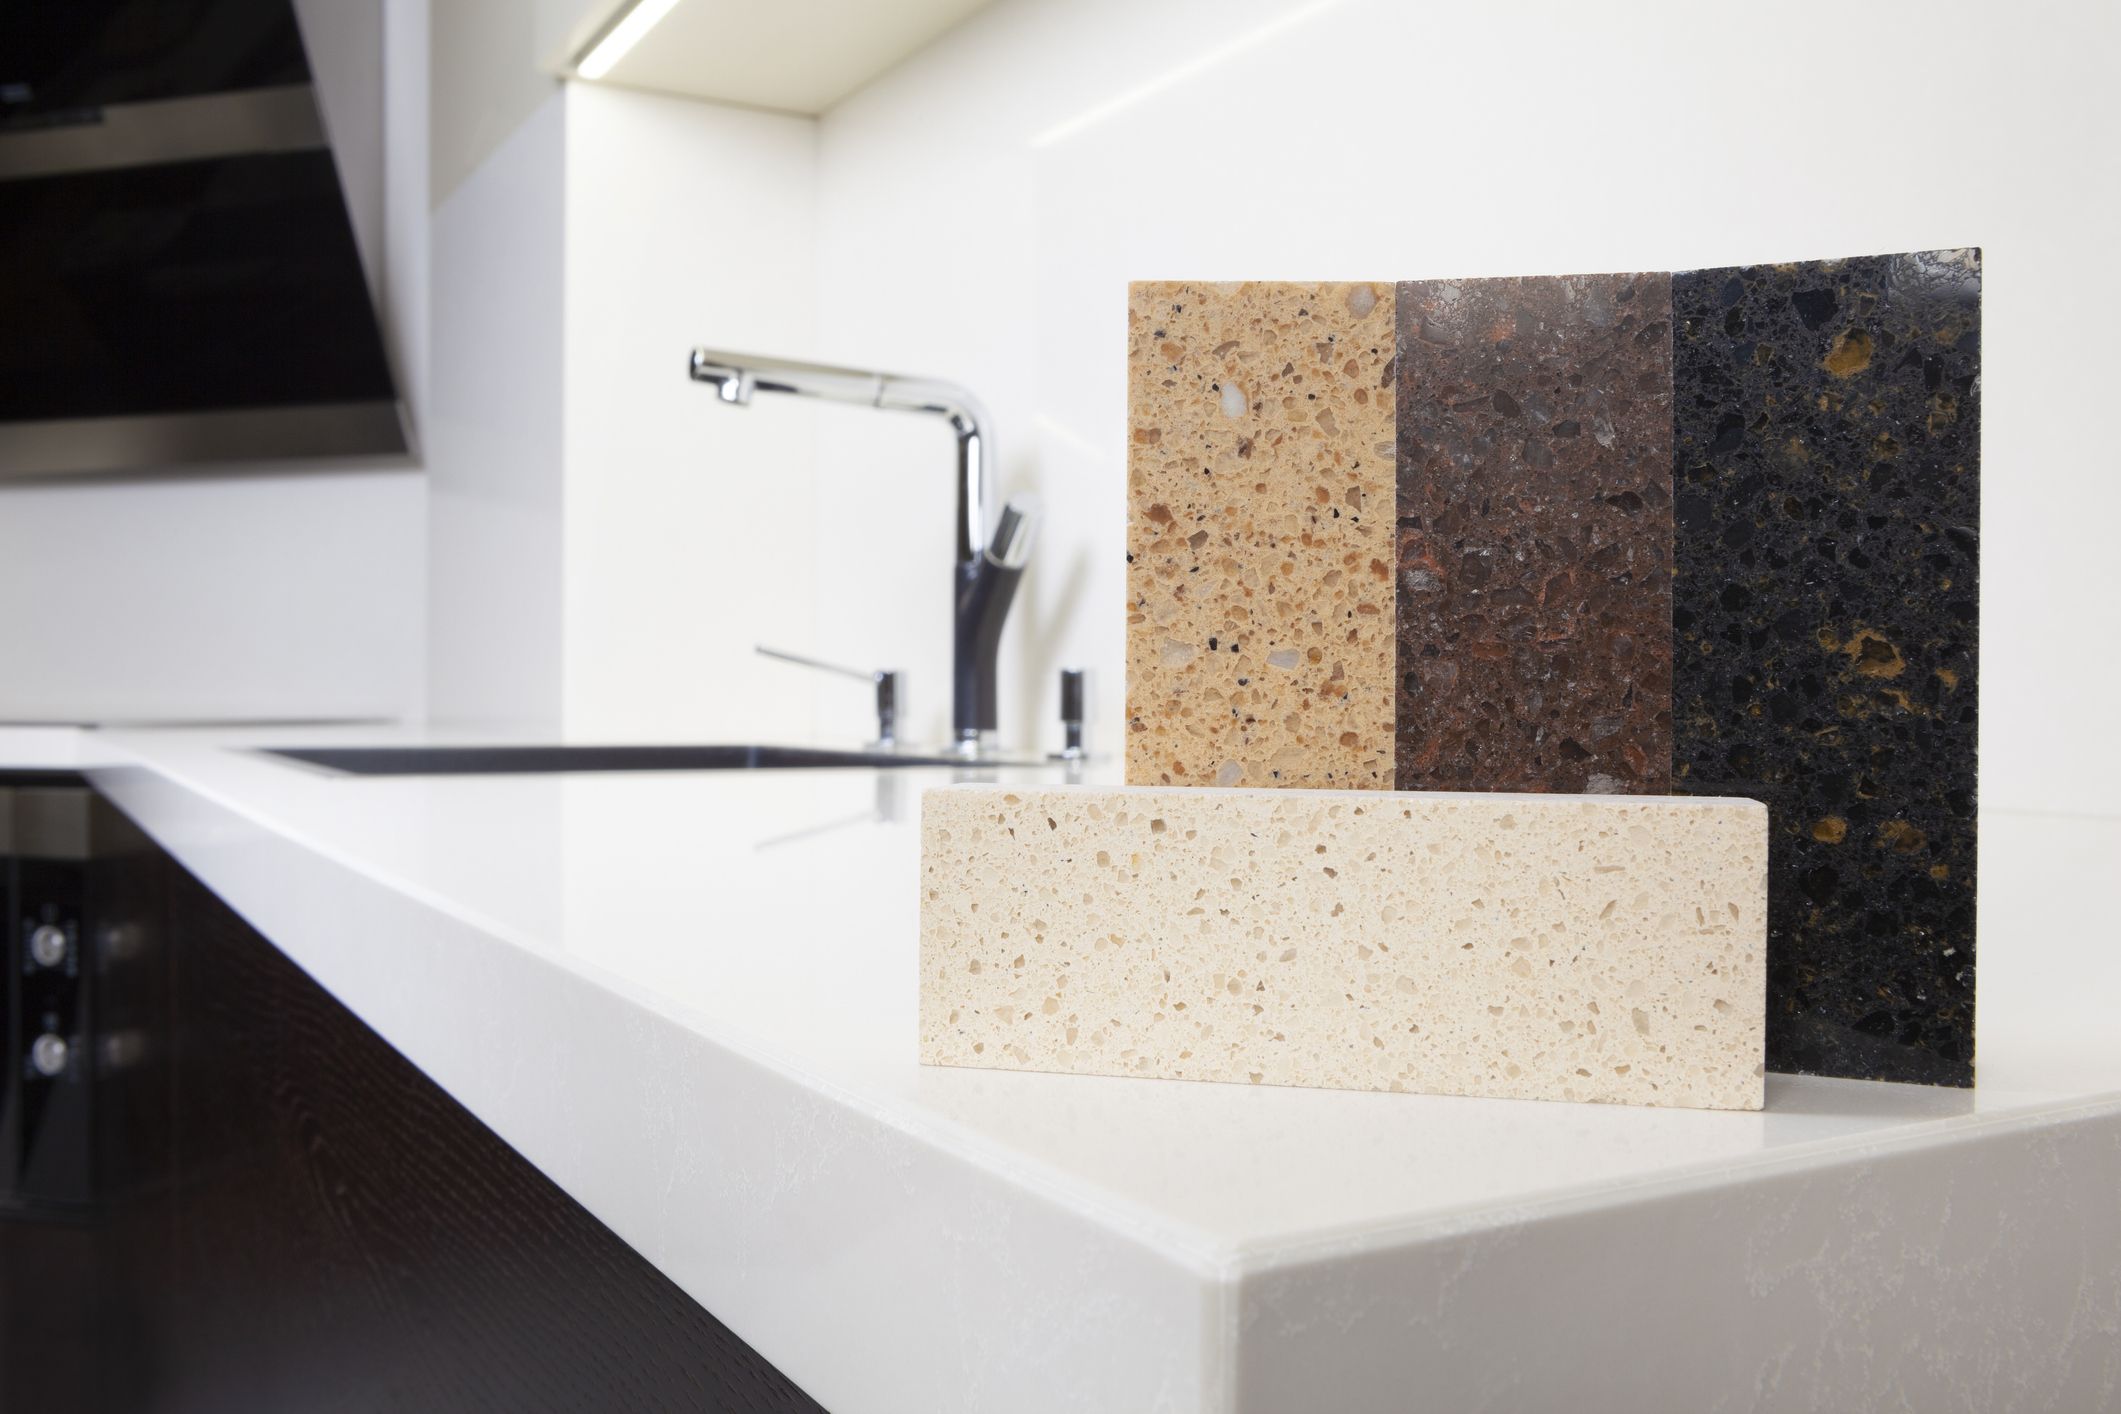 The Best Countertop Options For Kitchens, How To Choose Laminate Countertops